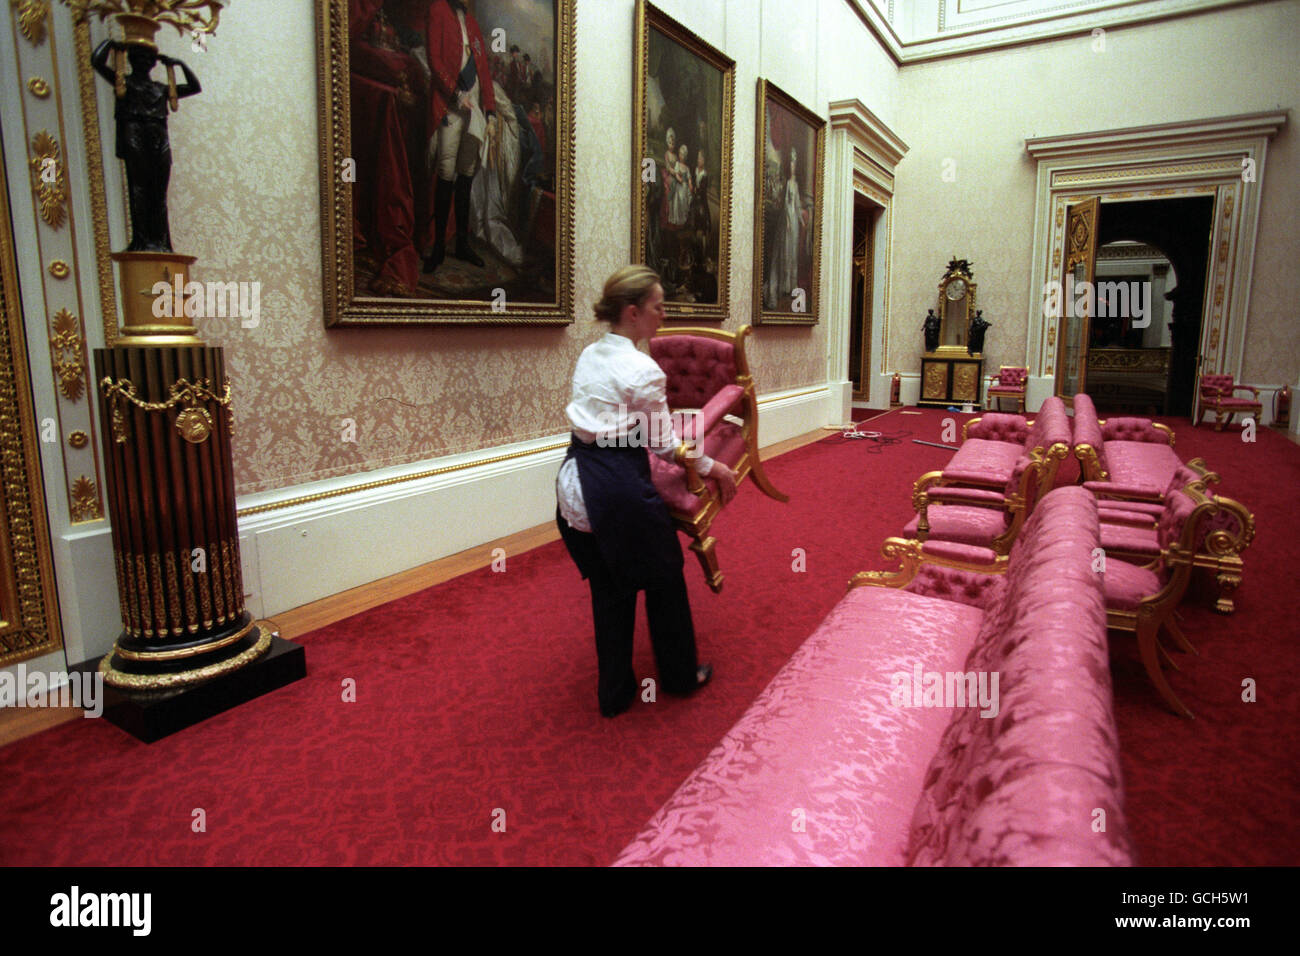 THE EAST GALLERY AT BUCKINGHAM PALACE, LONDON, RECEIVES ITS FINISHING TOUCHES BEFORE IT OPENS ITS DOORS TO THE PUBLIC FROM THE 5TH OF AUGUST UNTIL THE 4TH OF OCTOBER 1998. Stock Photo